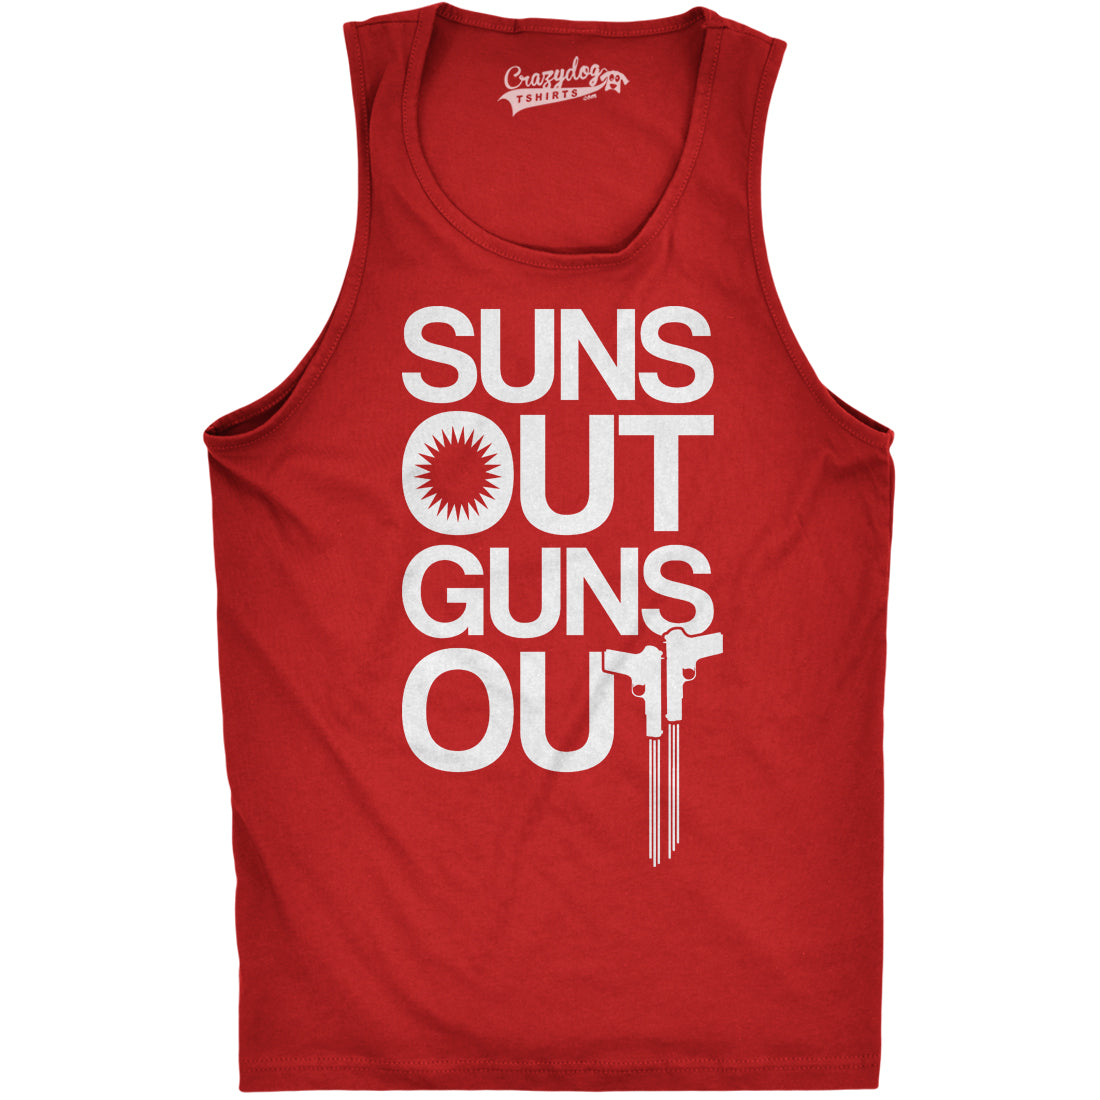 Funny Red Suns Out Guns Out Mens Tank Top Nerdy Fitness Tee